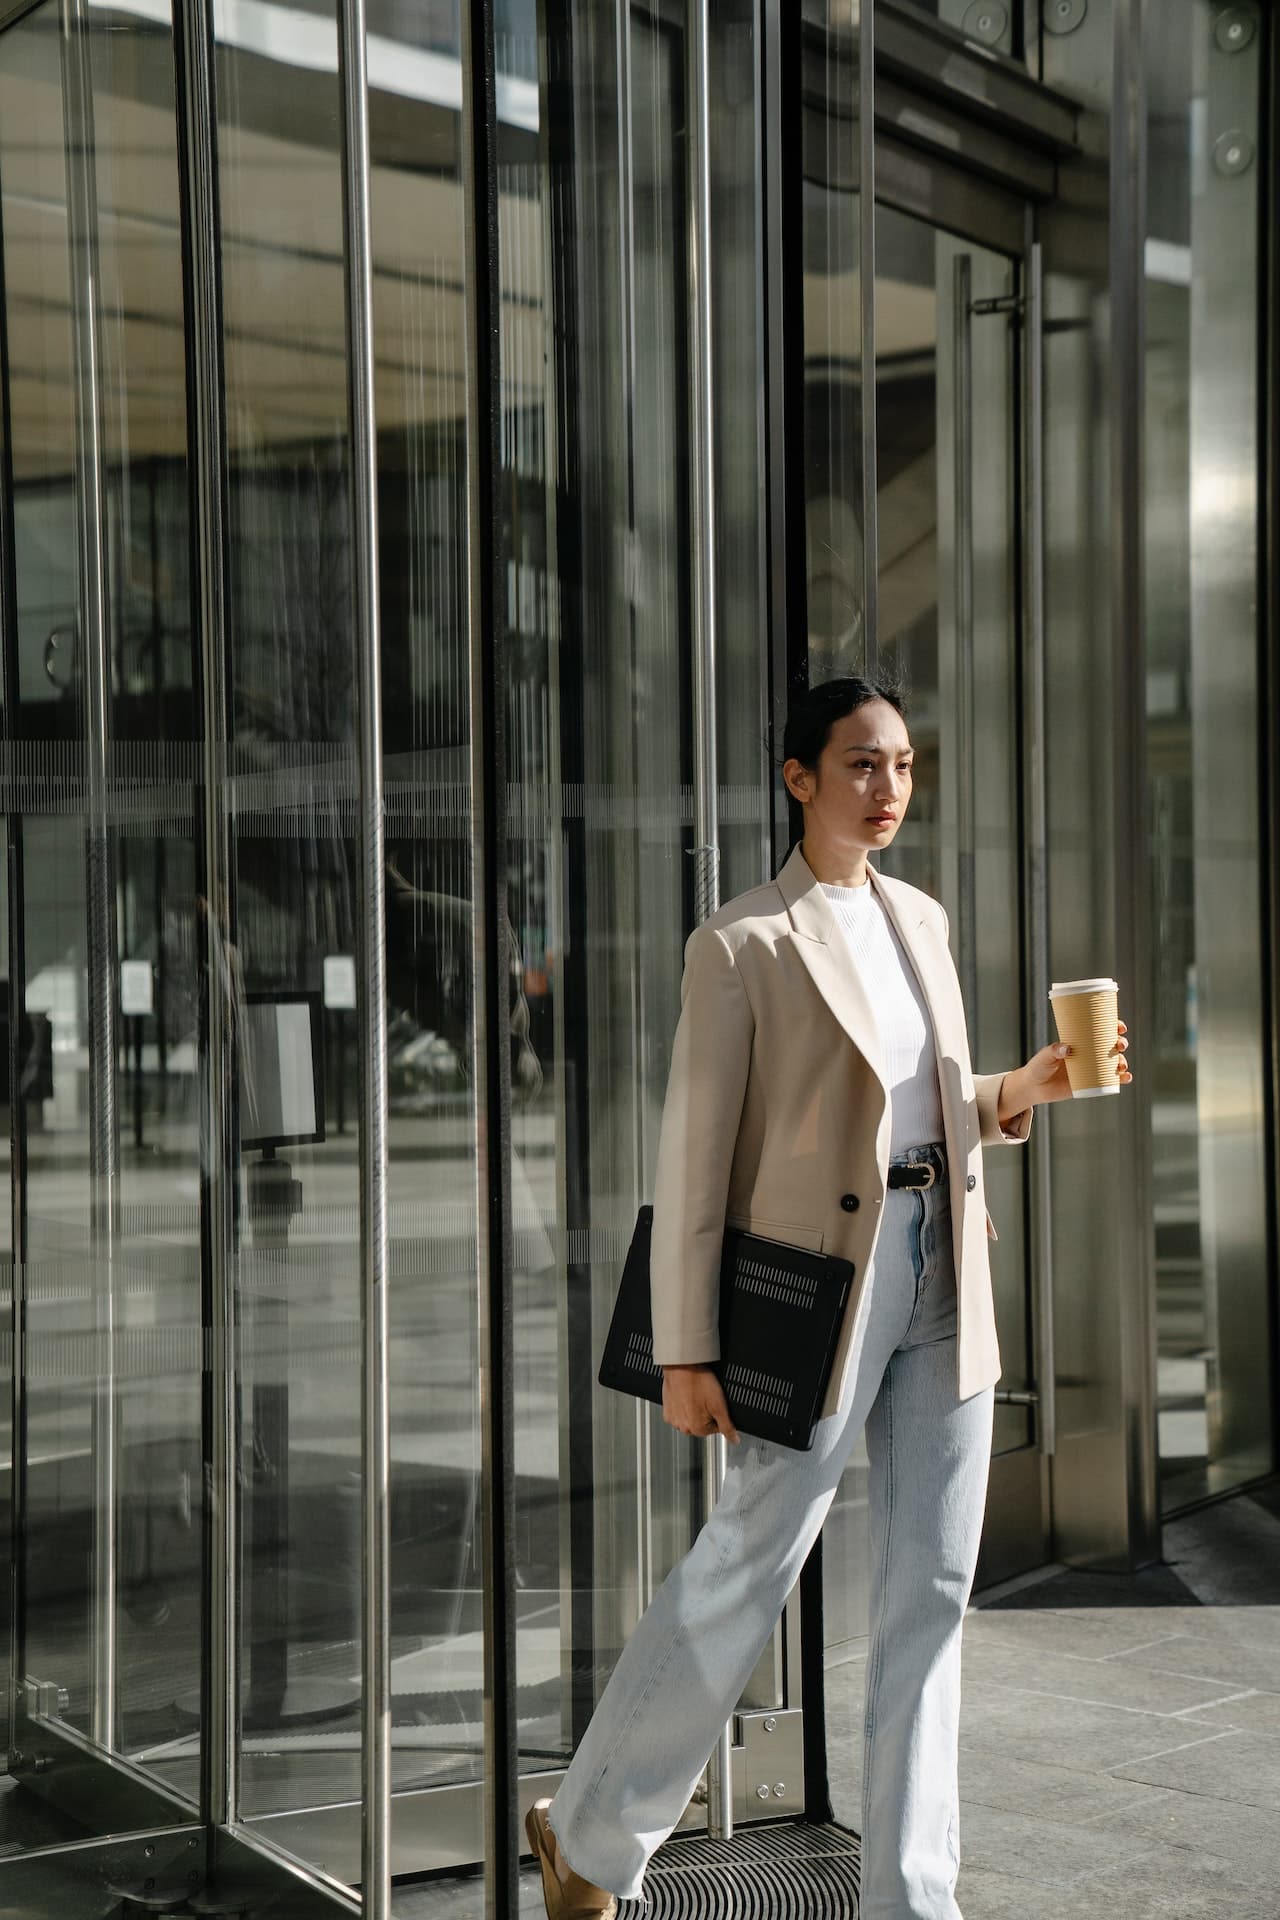 A confident Asian woman in business attire walks out the door of a corporate office with a cup of coffee.